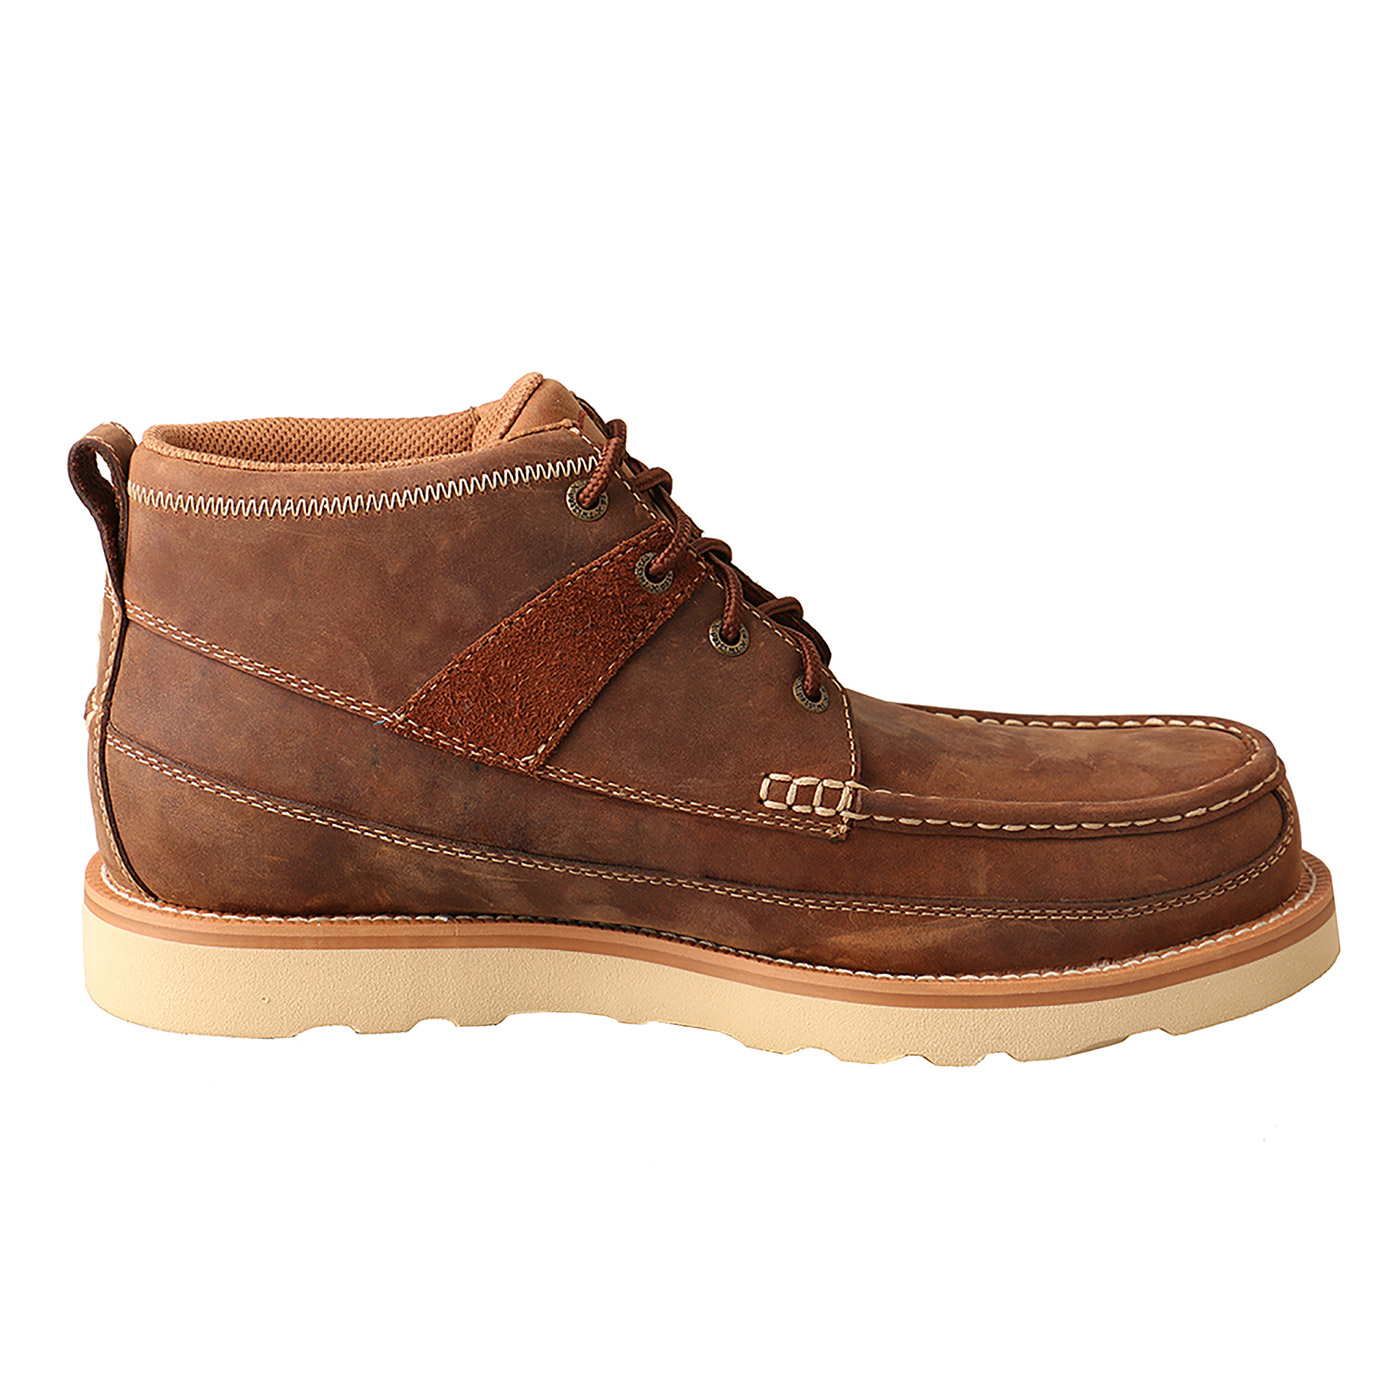 Men's Twisted X Wedge Sole Steel Toe-Oiled Saddle